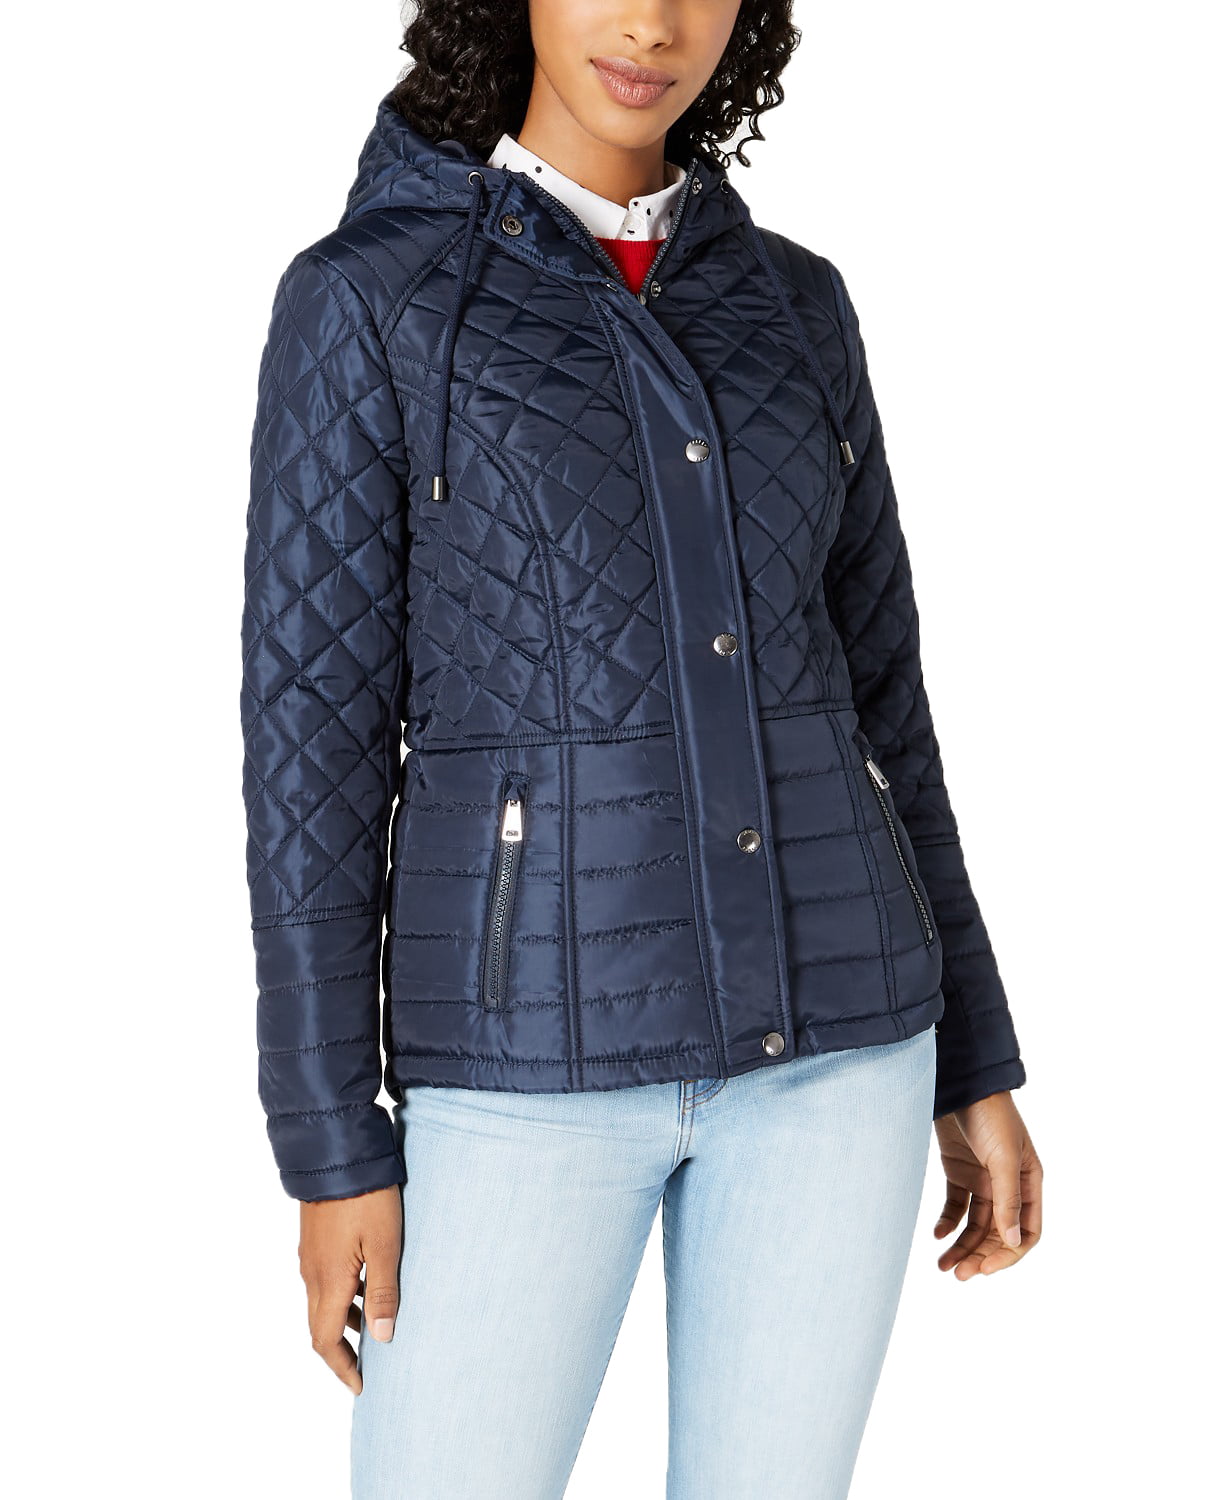 www.couturepoint.com-sebby-womens-blue-hooded-water-resistant-quilted-coat-jacket